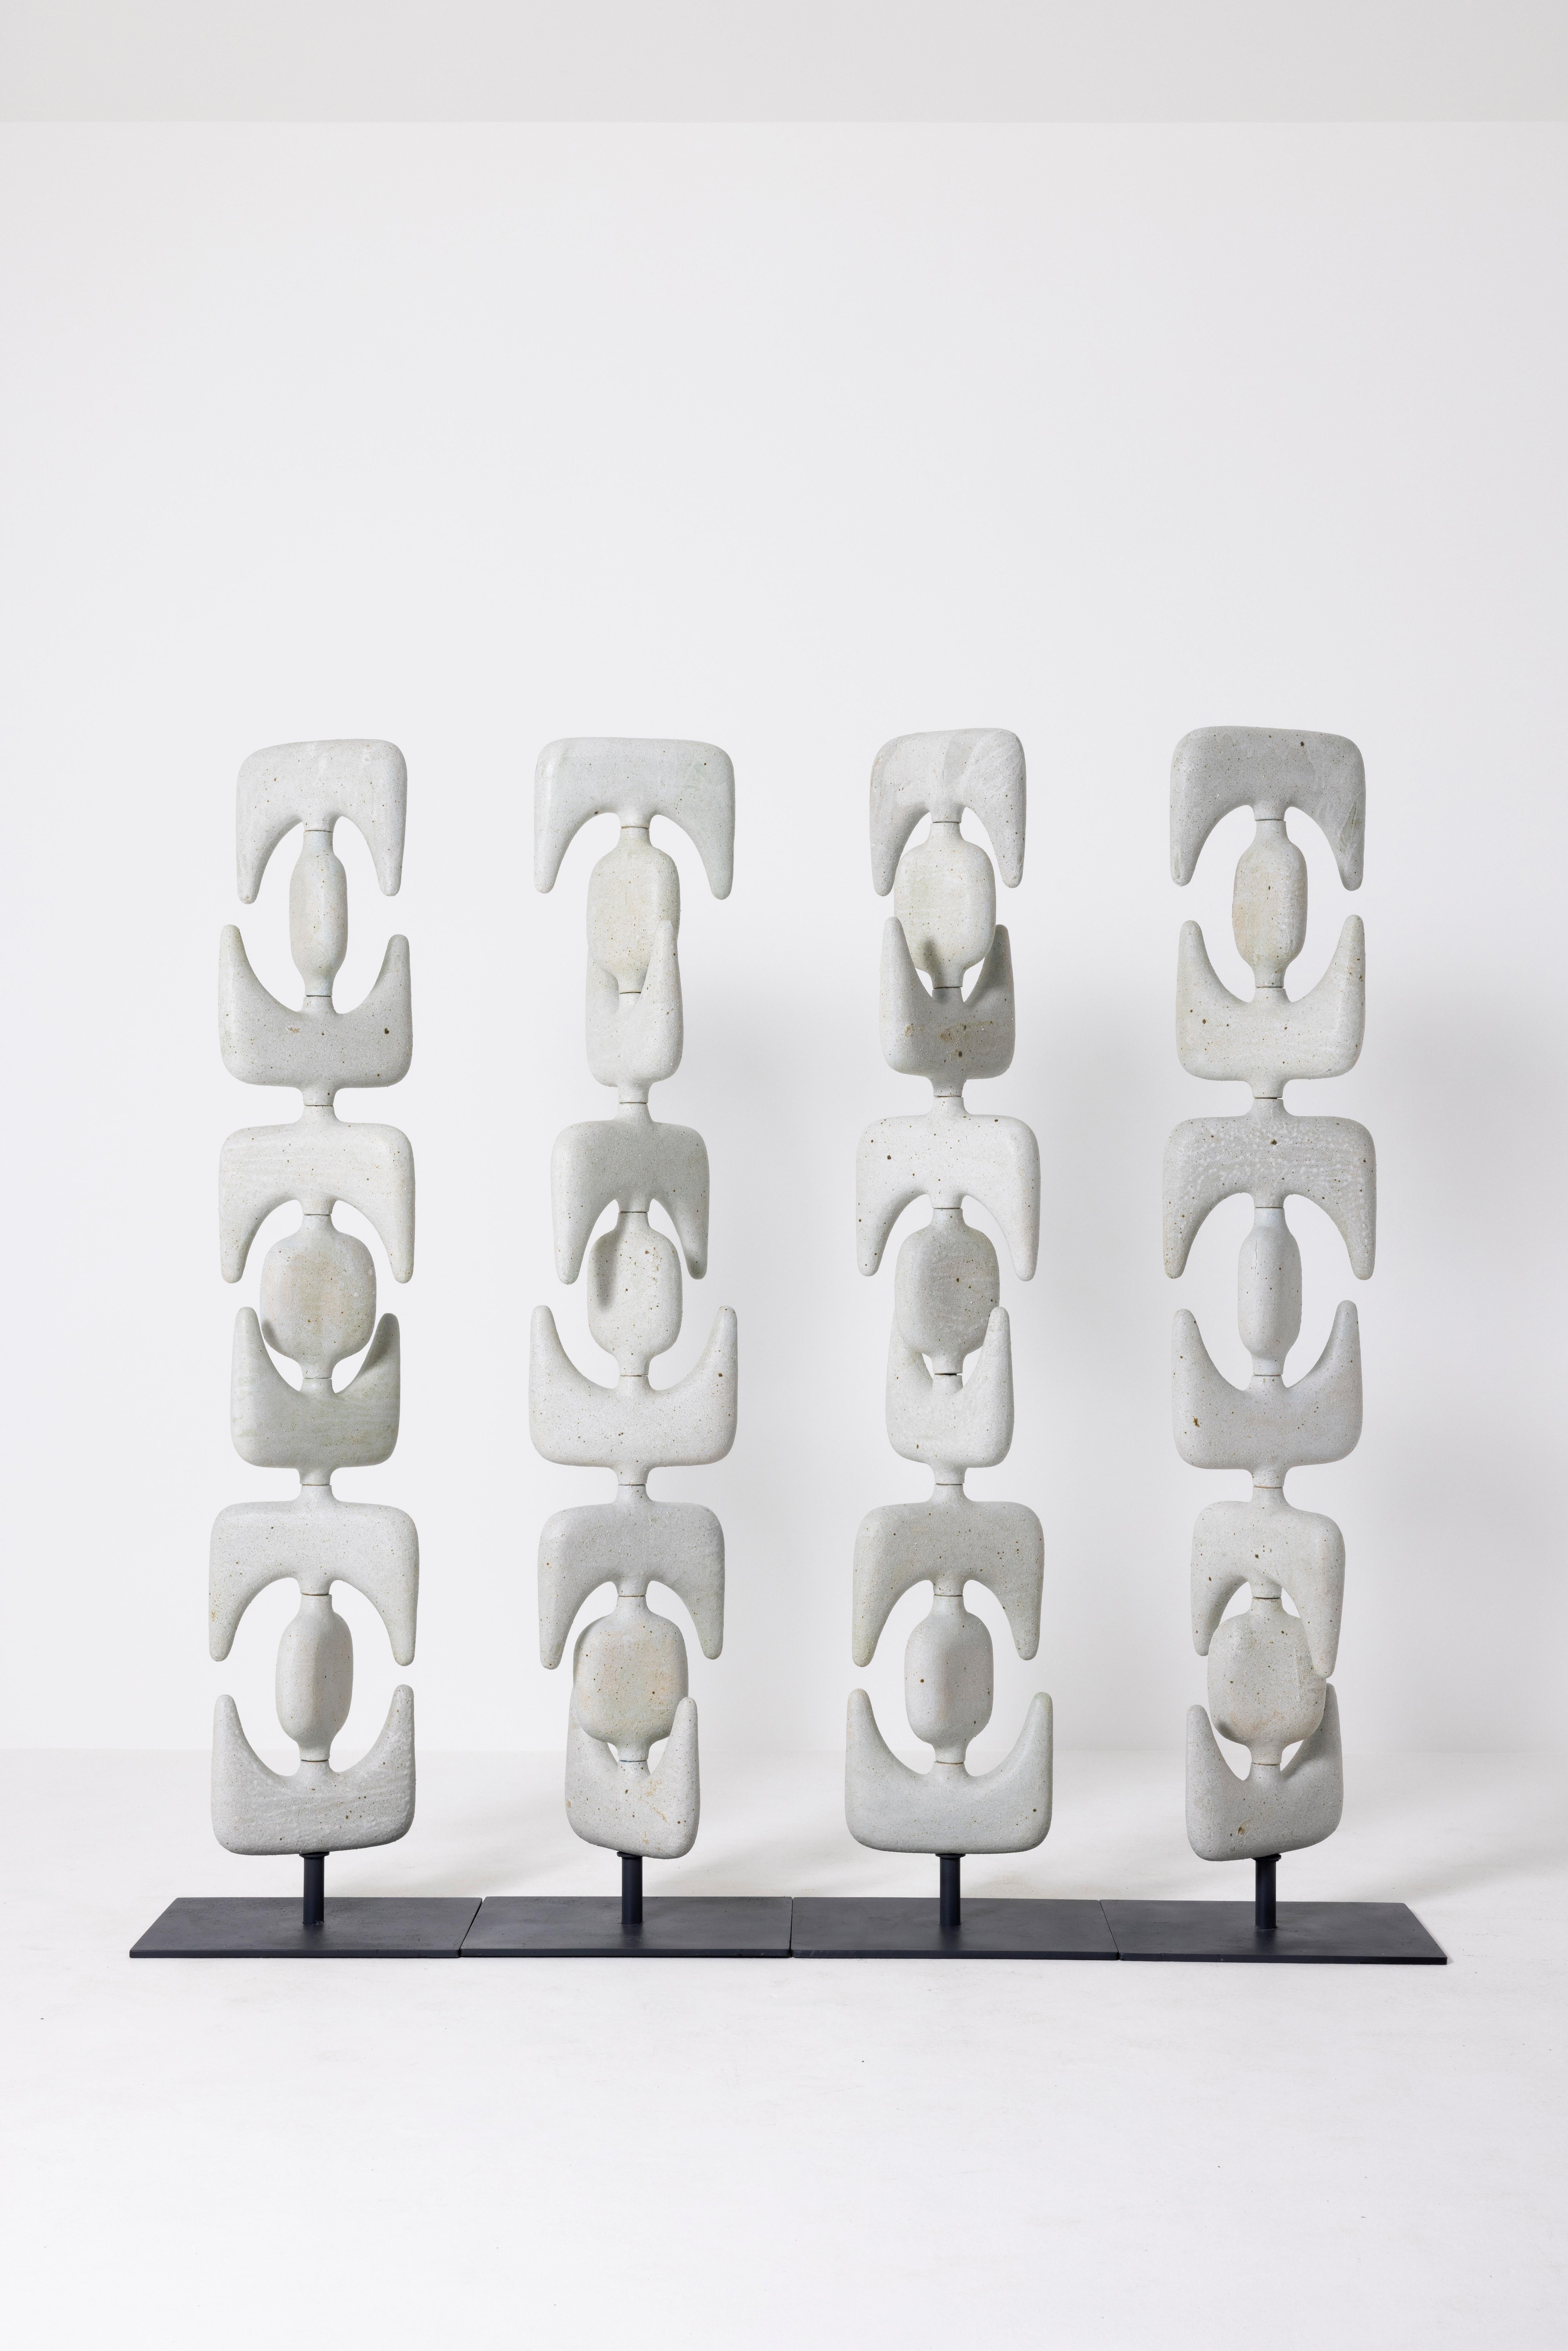 Hand-Crafted Contemporary Room Divider / Screen Totem Sculptures For Sale